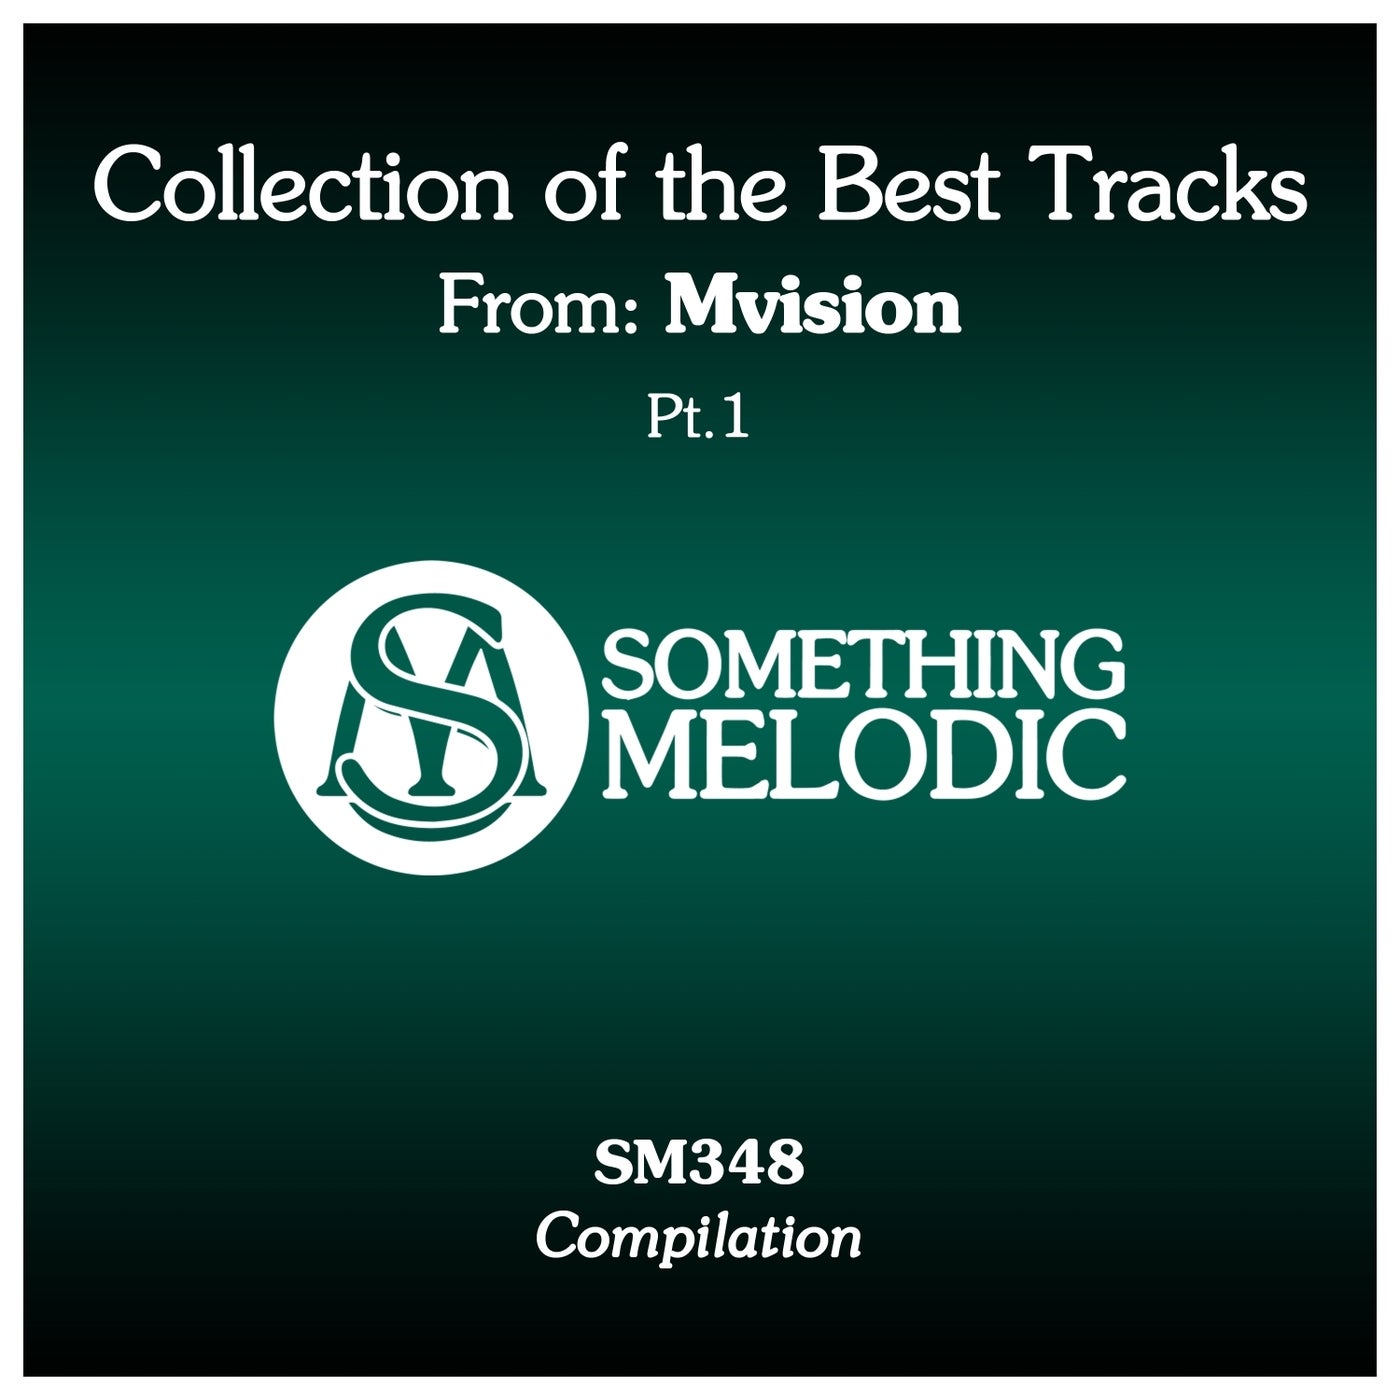 Collection of the Best Tracks From: Mvision, Pt. 1